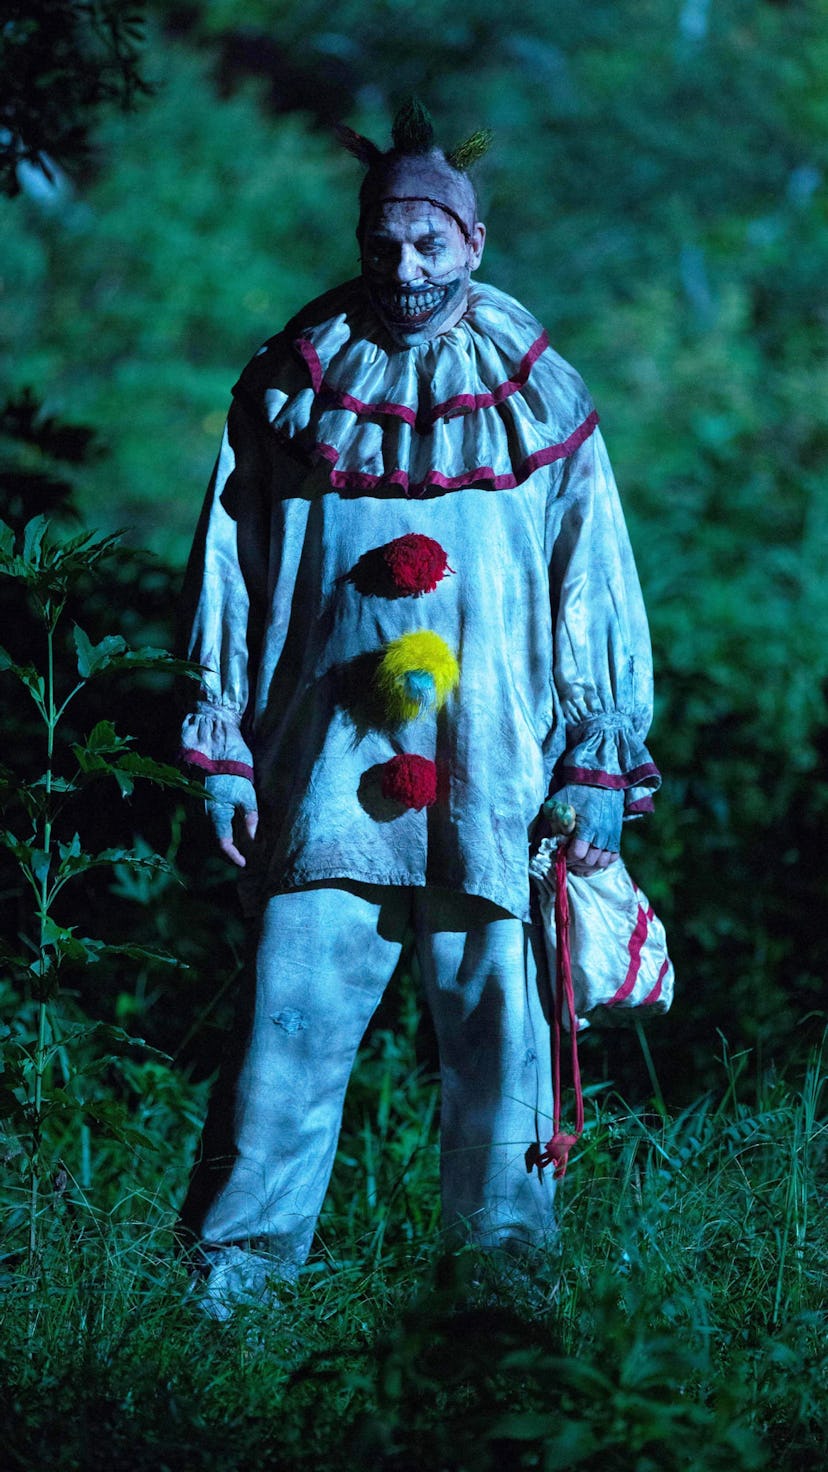 Twisty the clown is one of the scariest 'American Horror Story' characters.